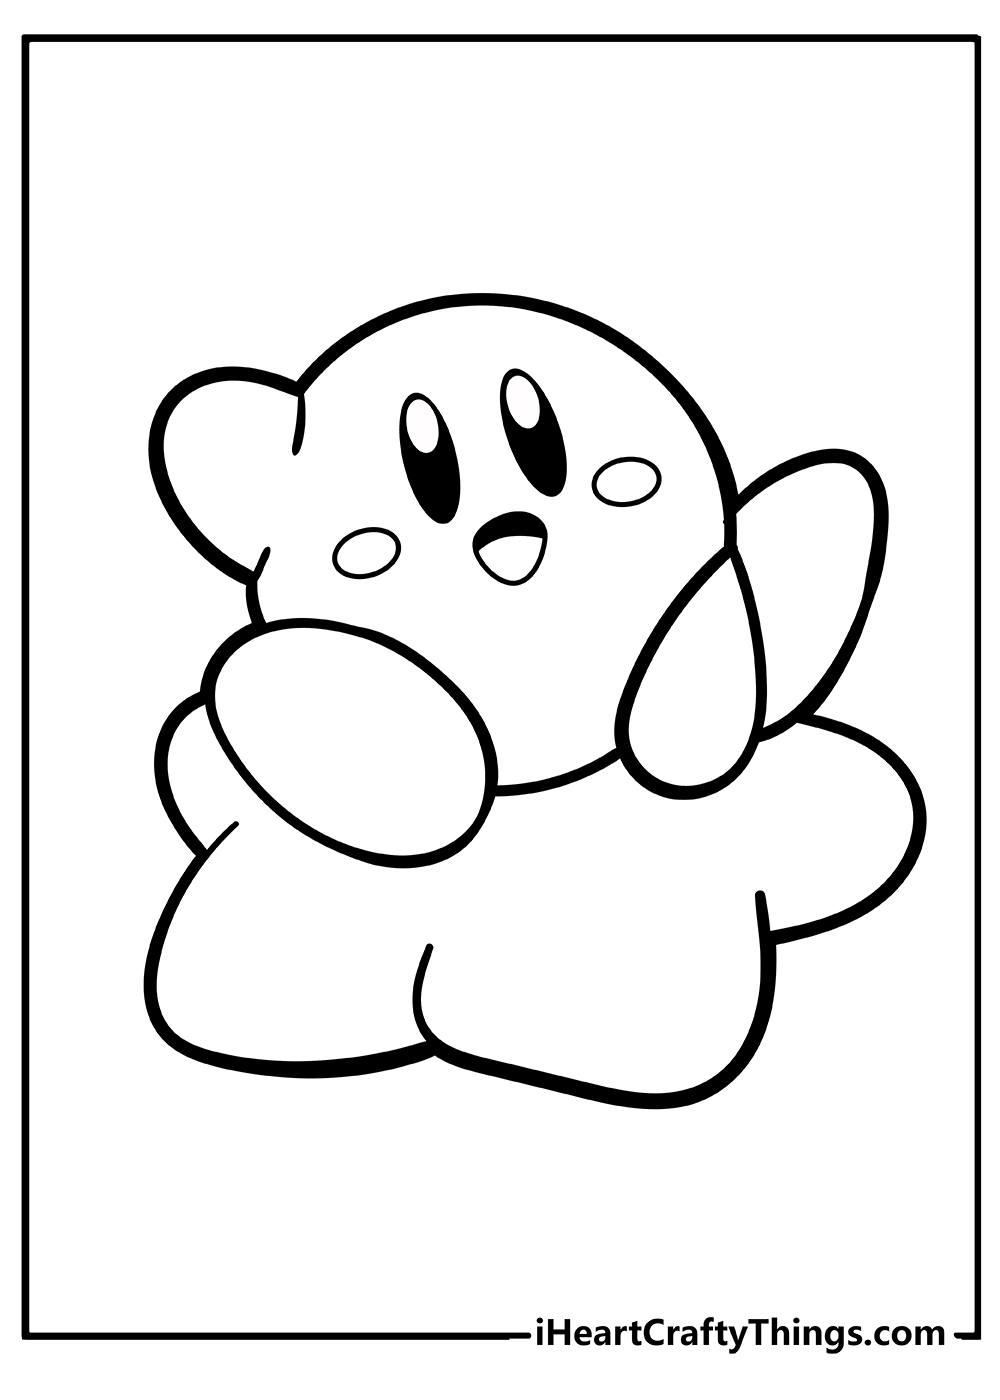 Kirby Coloring Pages for preschoolers free printable